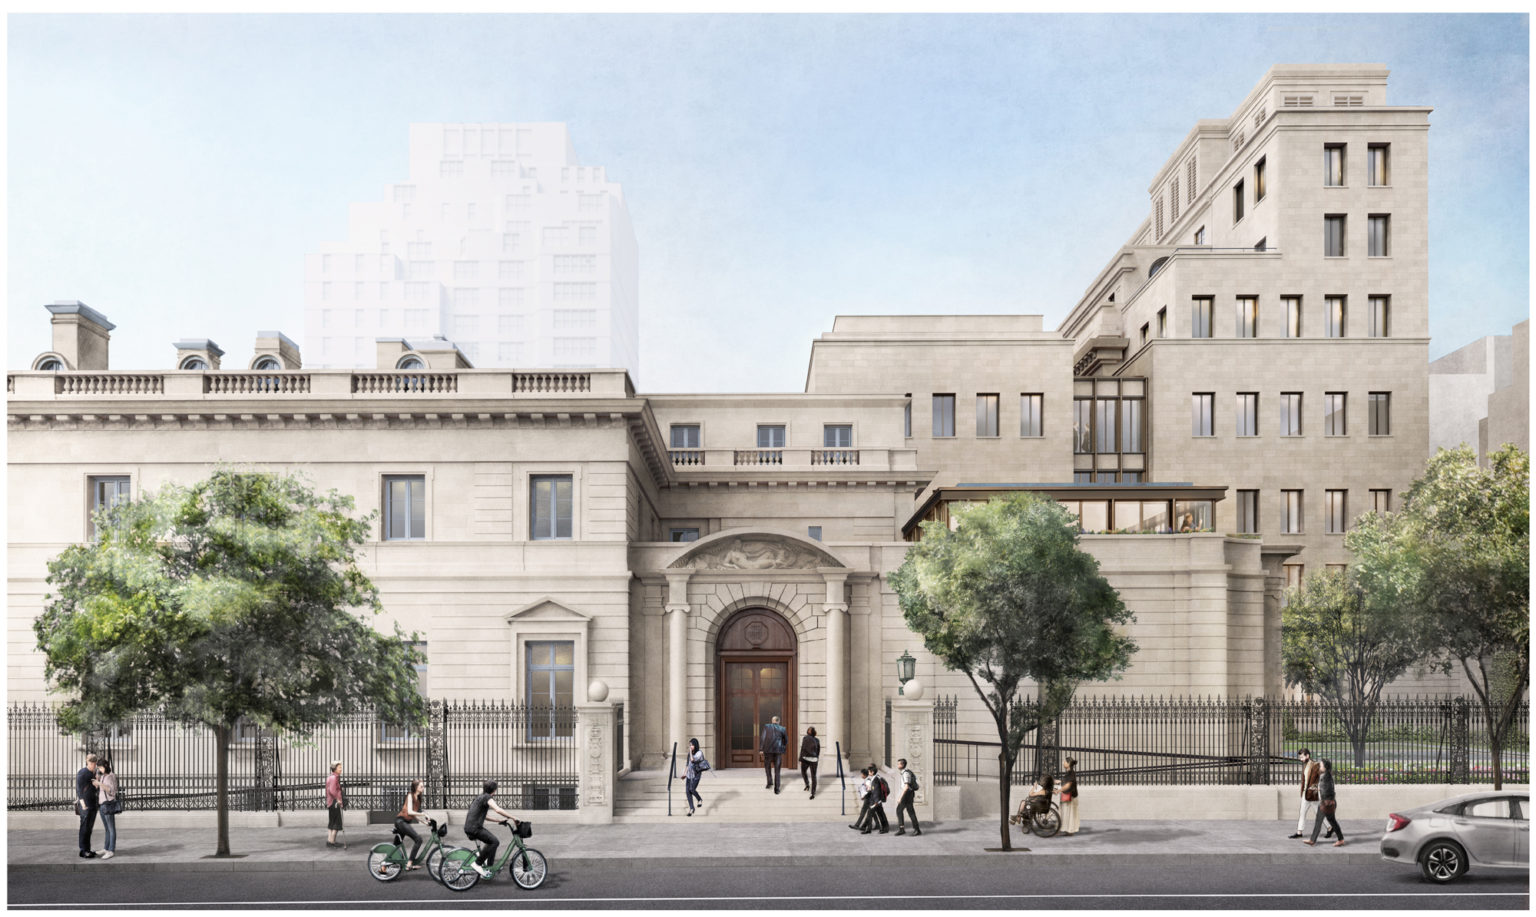 Frick-Collection_Rendering_Exterior_South-Facing_2000-1-1536x917.jpg